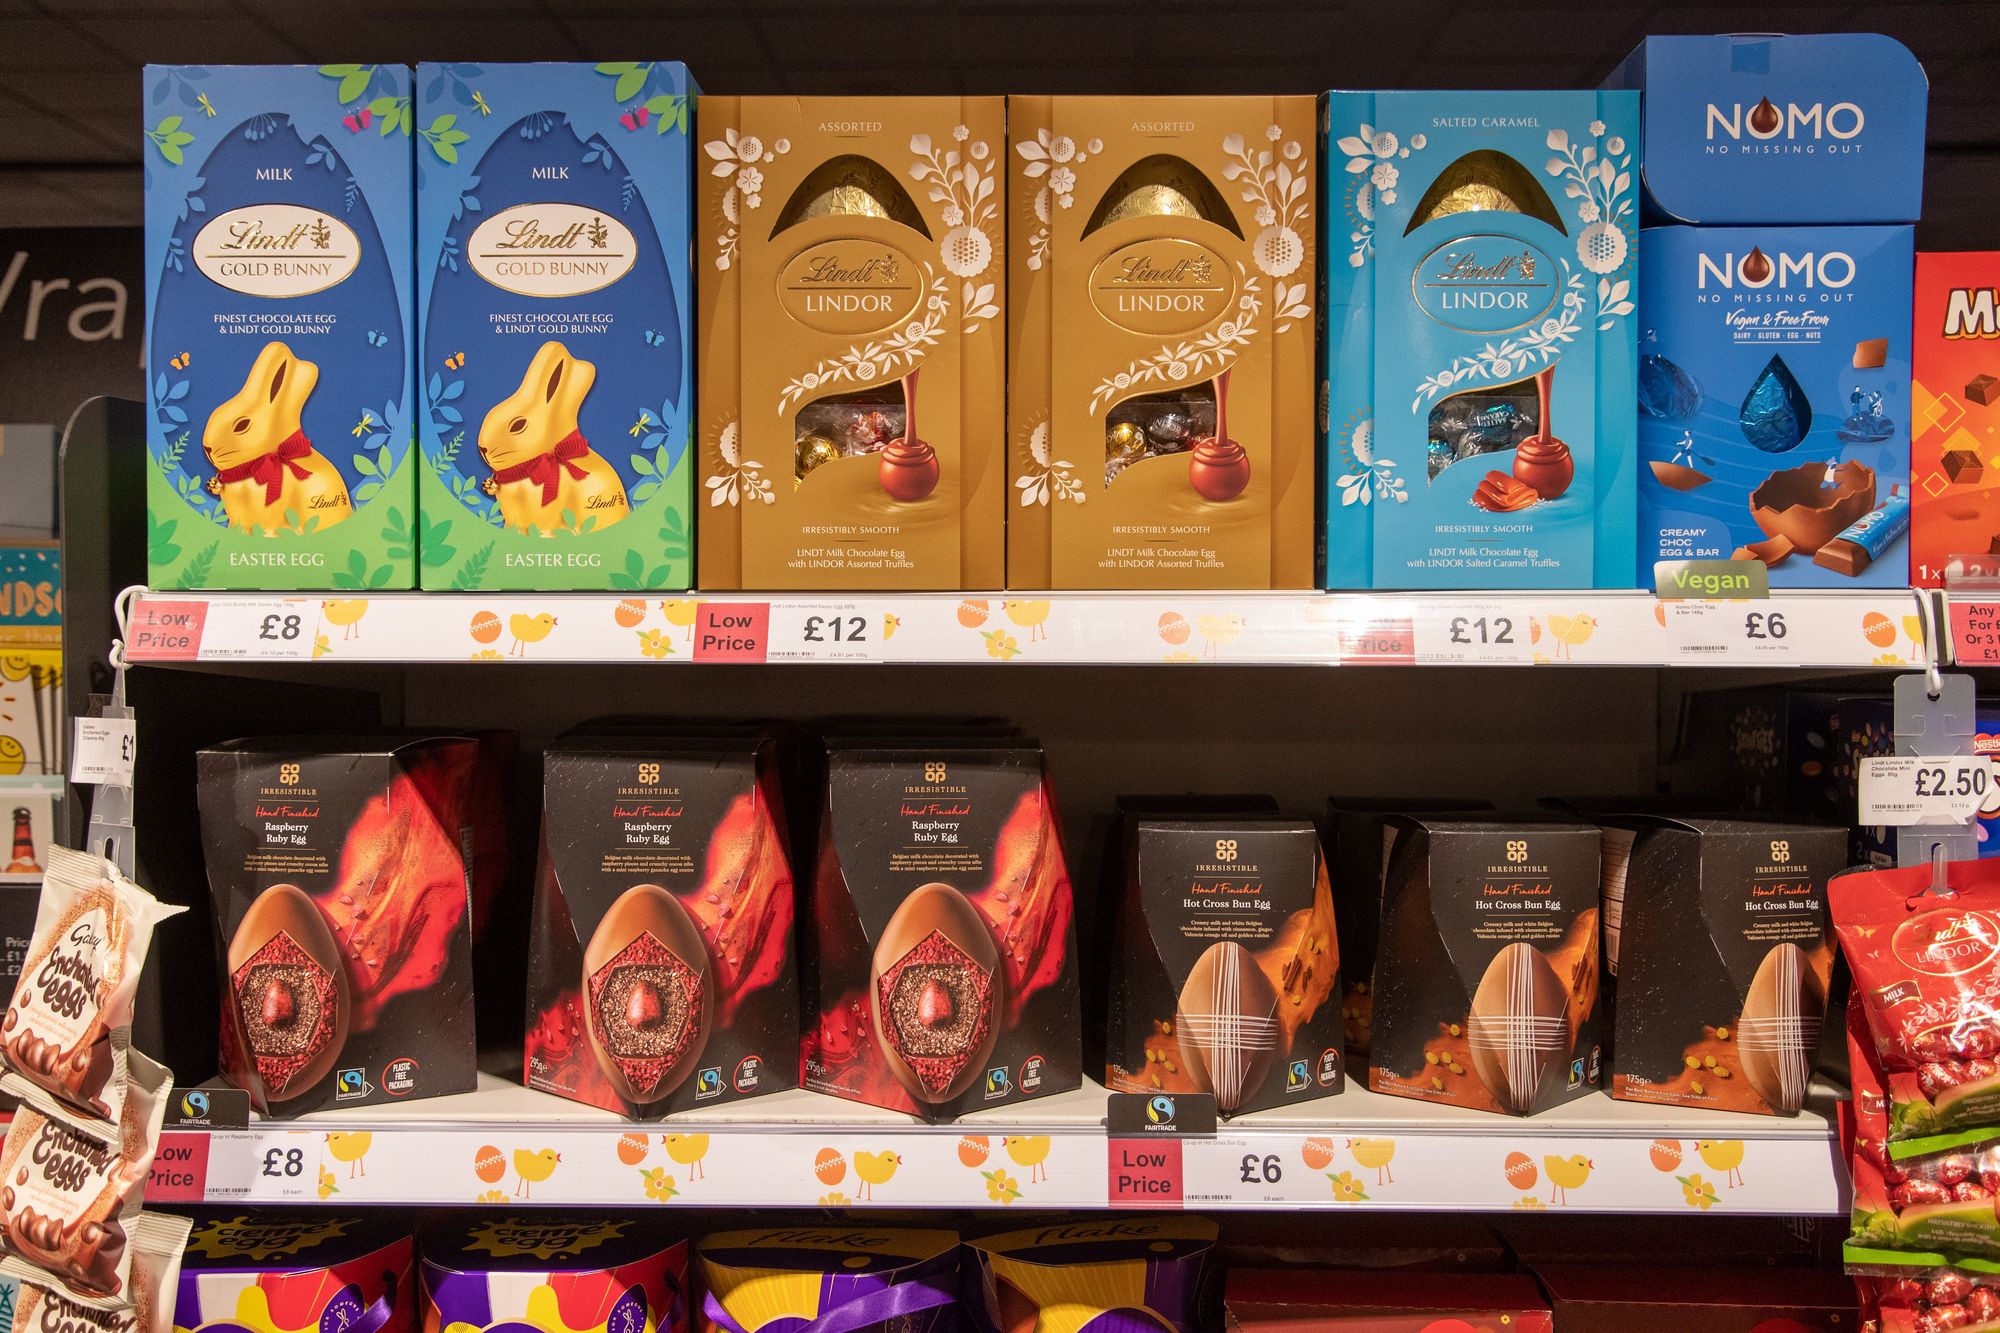 New Central England Co-op research on Easter buying habits revealed